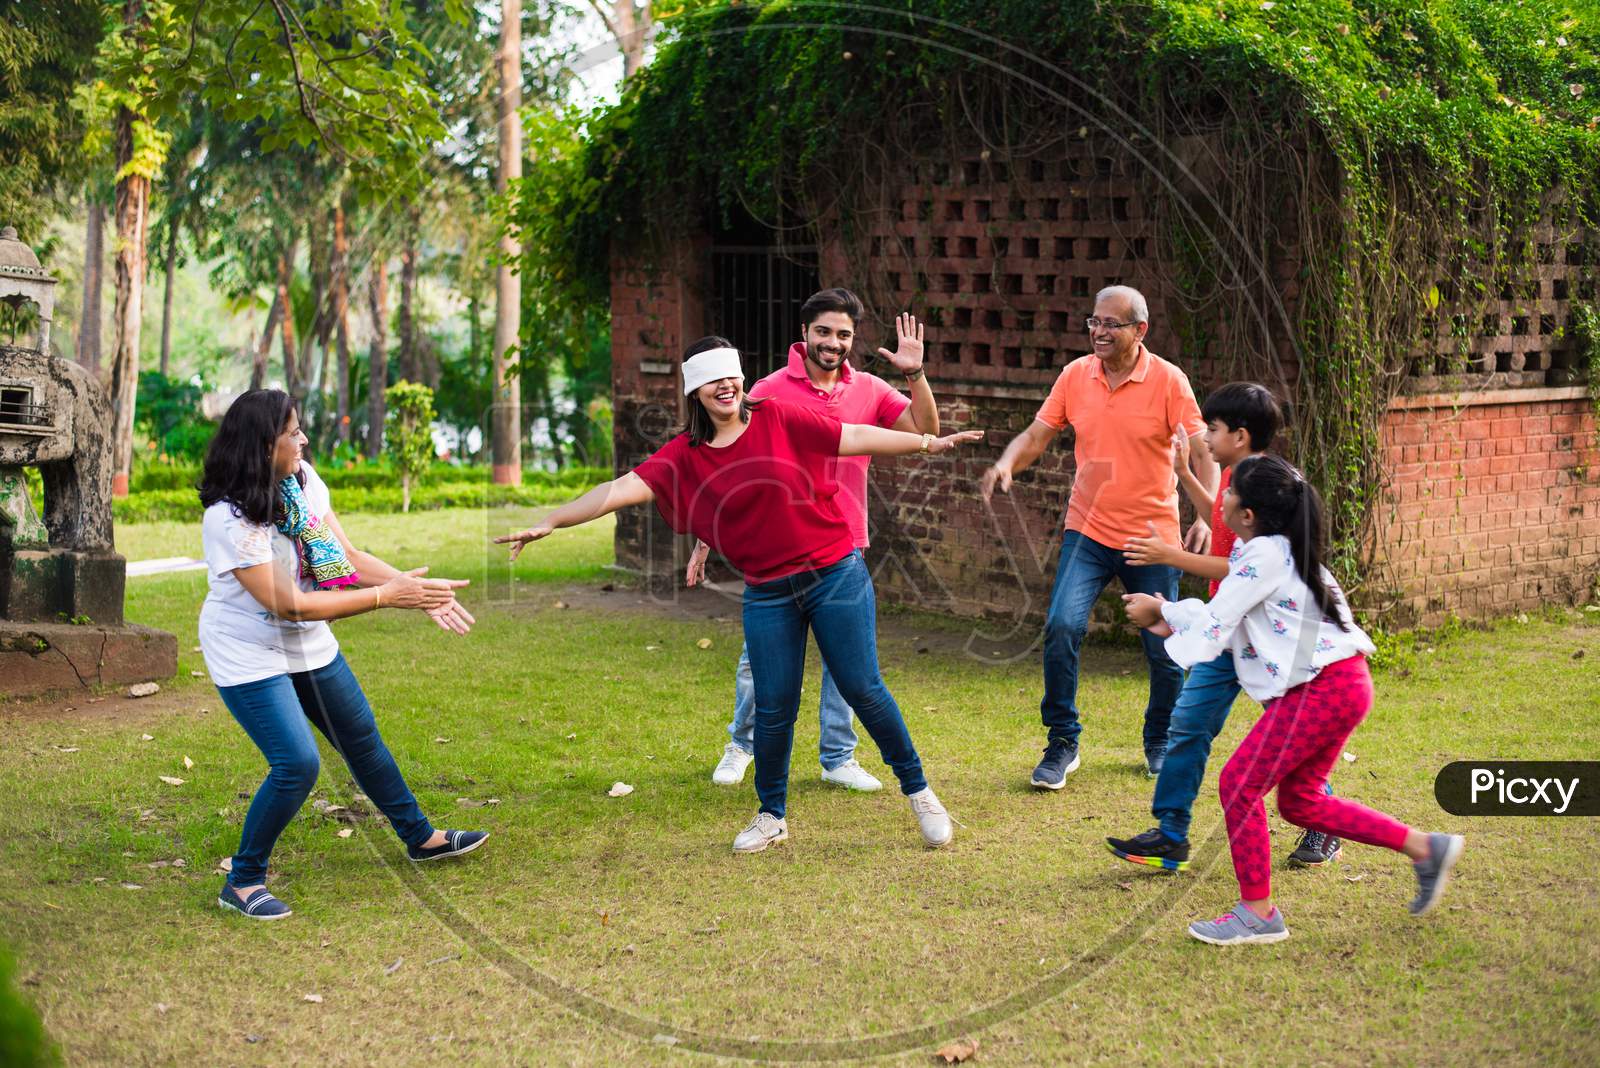 Indian Family playing blindfold game in park or garden